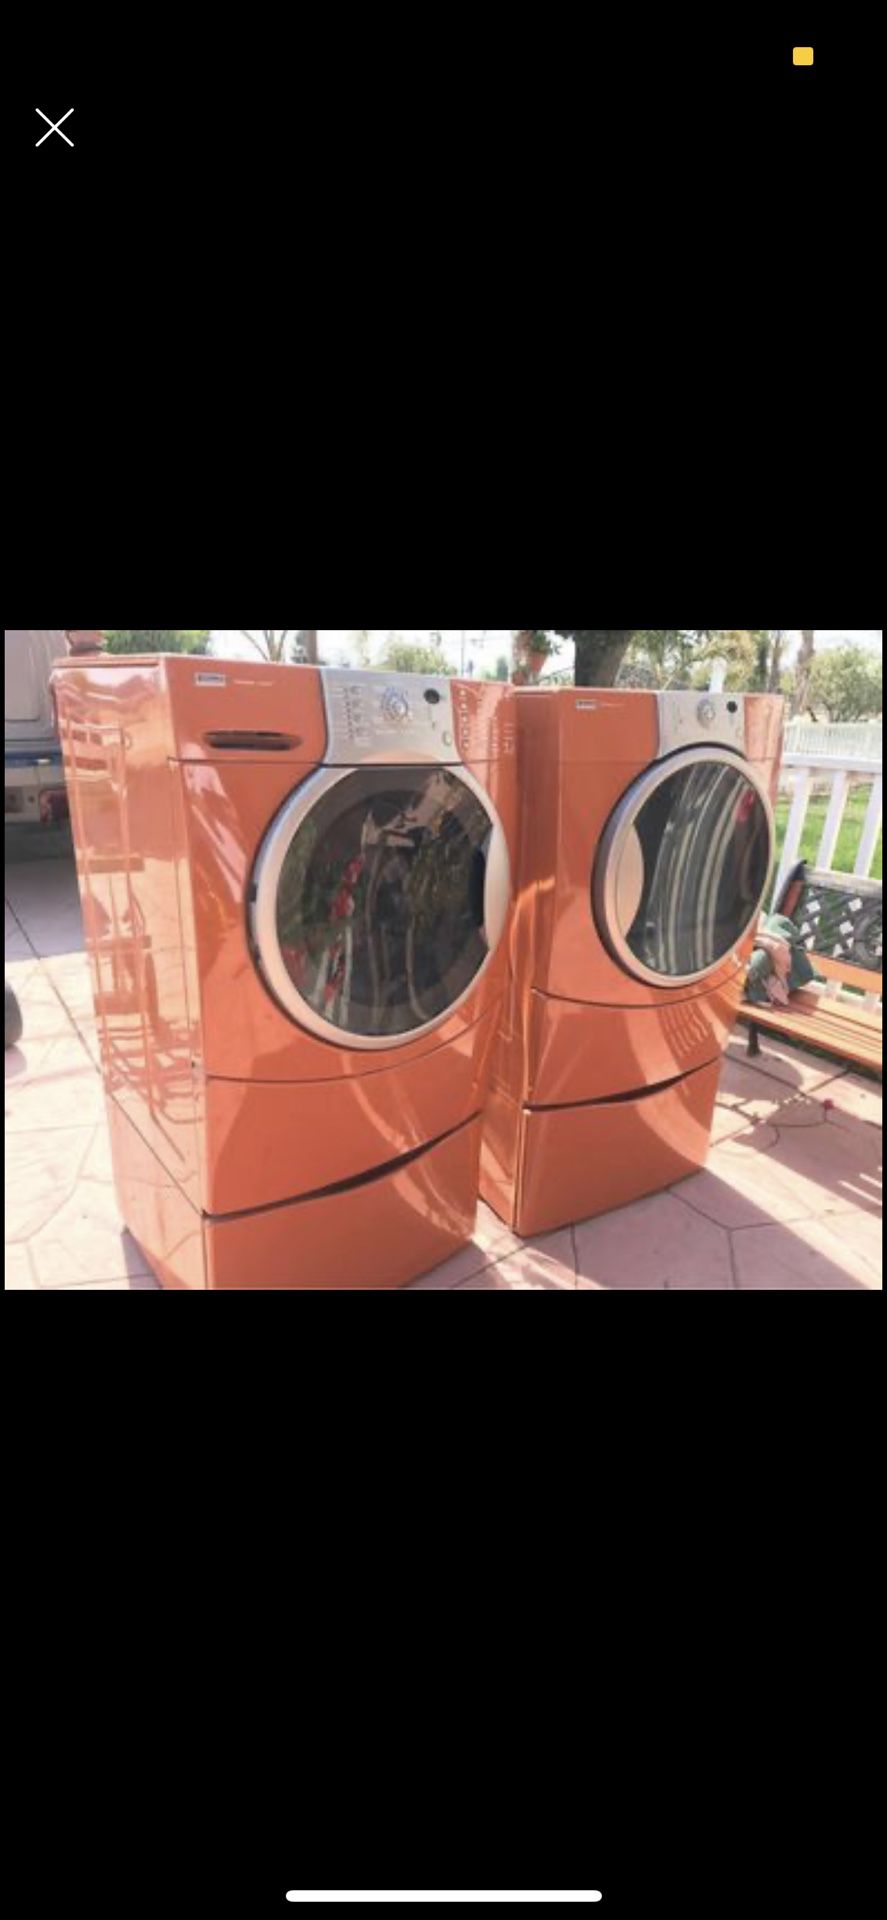 Kenmore dryer and washer (washer not working)